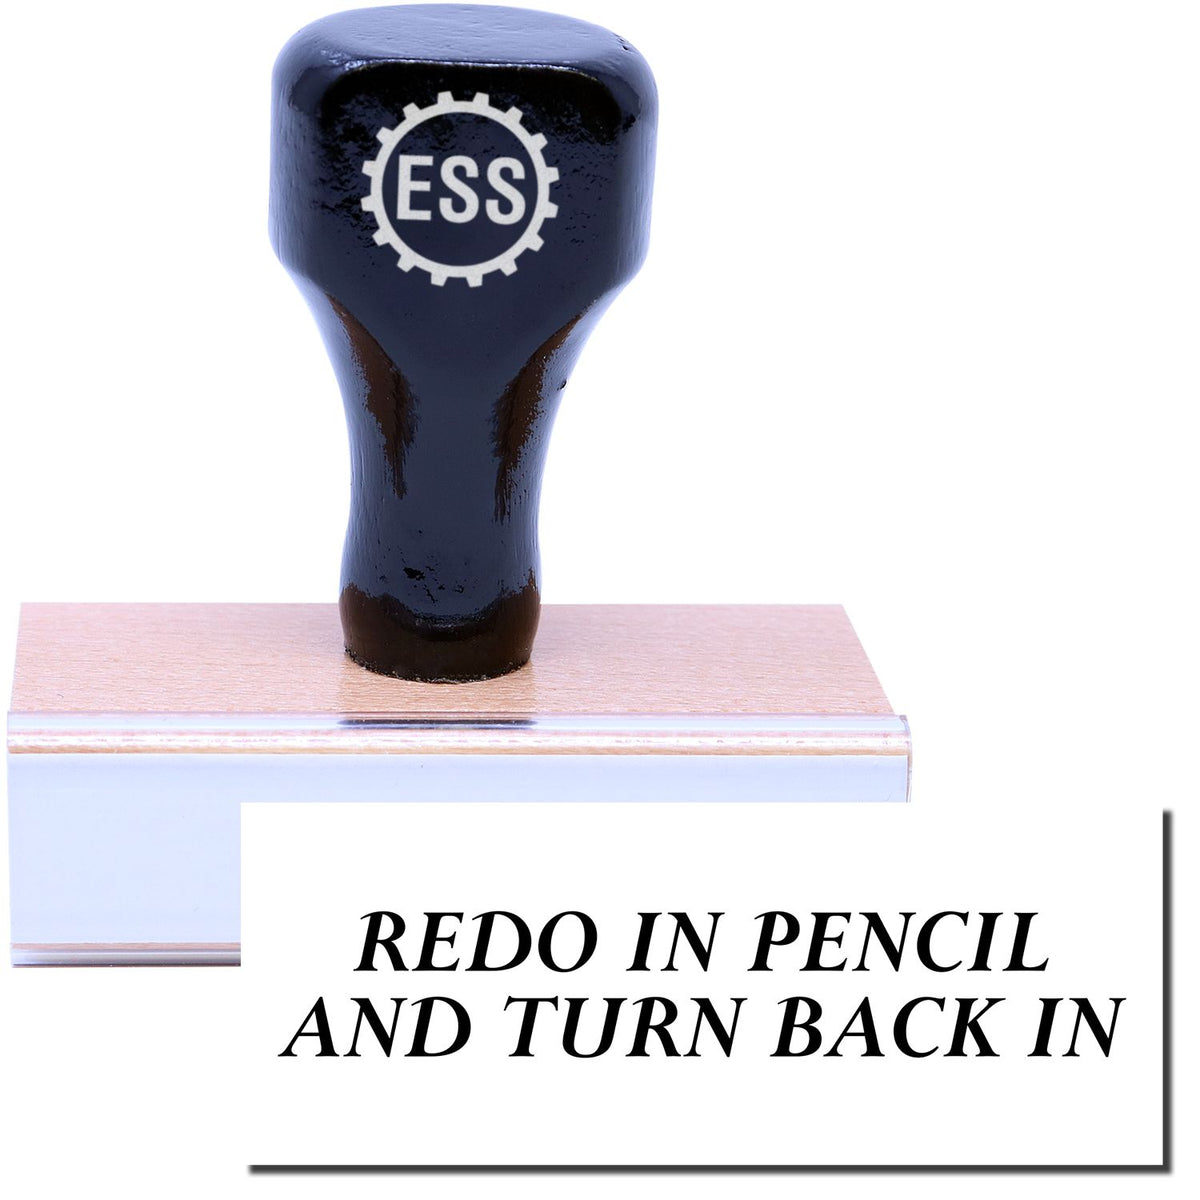 A stock office rubber stamp with a stamped image showing how the text &quot;REDO IN PENCIL AND TURN BACK IN&quot; in a large font is displayed after stamping.